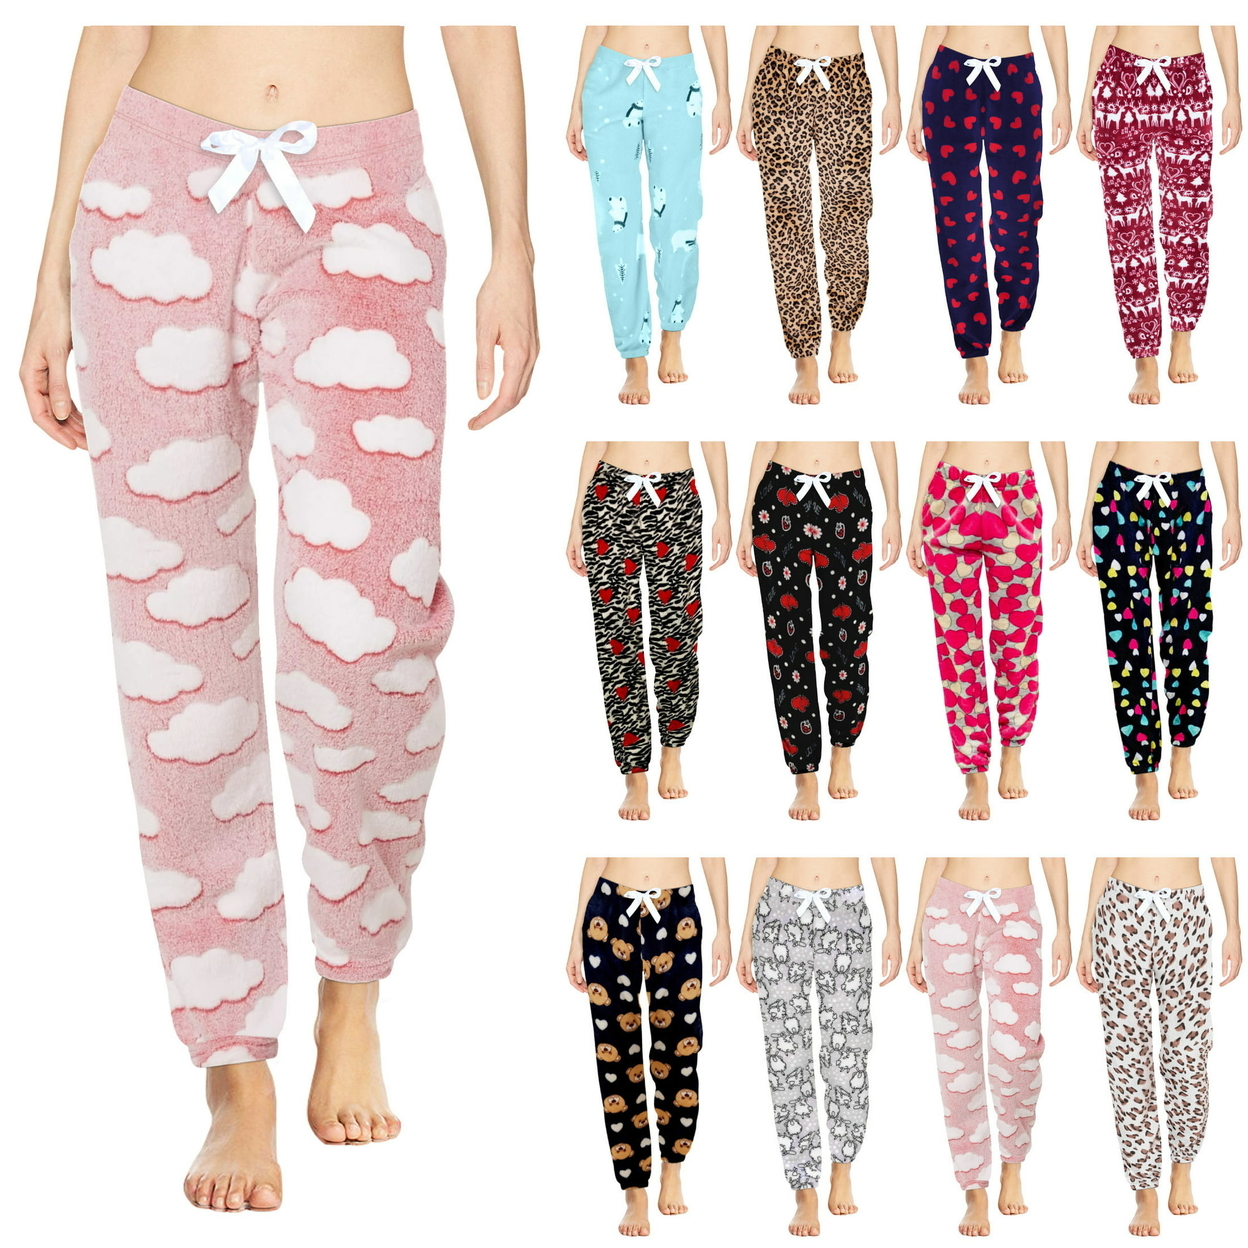 3-Pack: Women's Solid & Printed Ultra-Soft Comfy Stretch Micro-Fleece Pajama Lounge Pants - Xx-large, Love